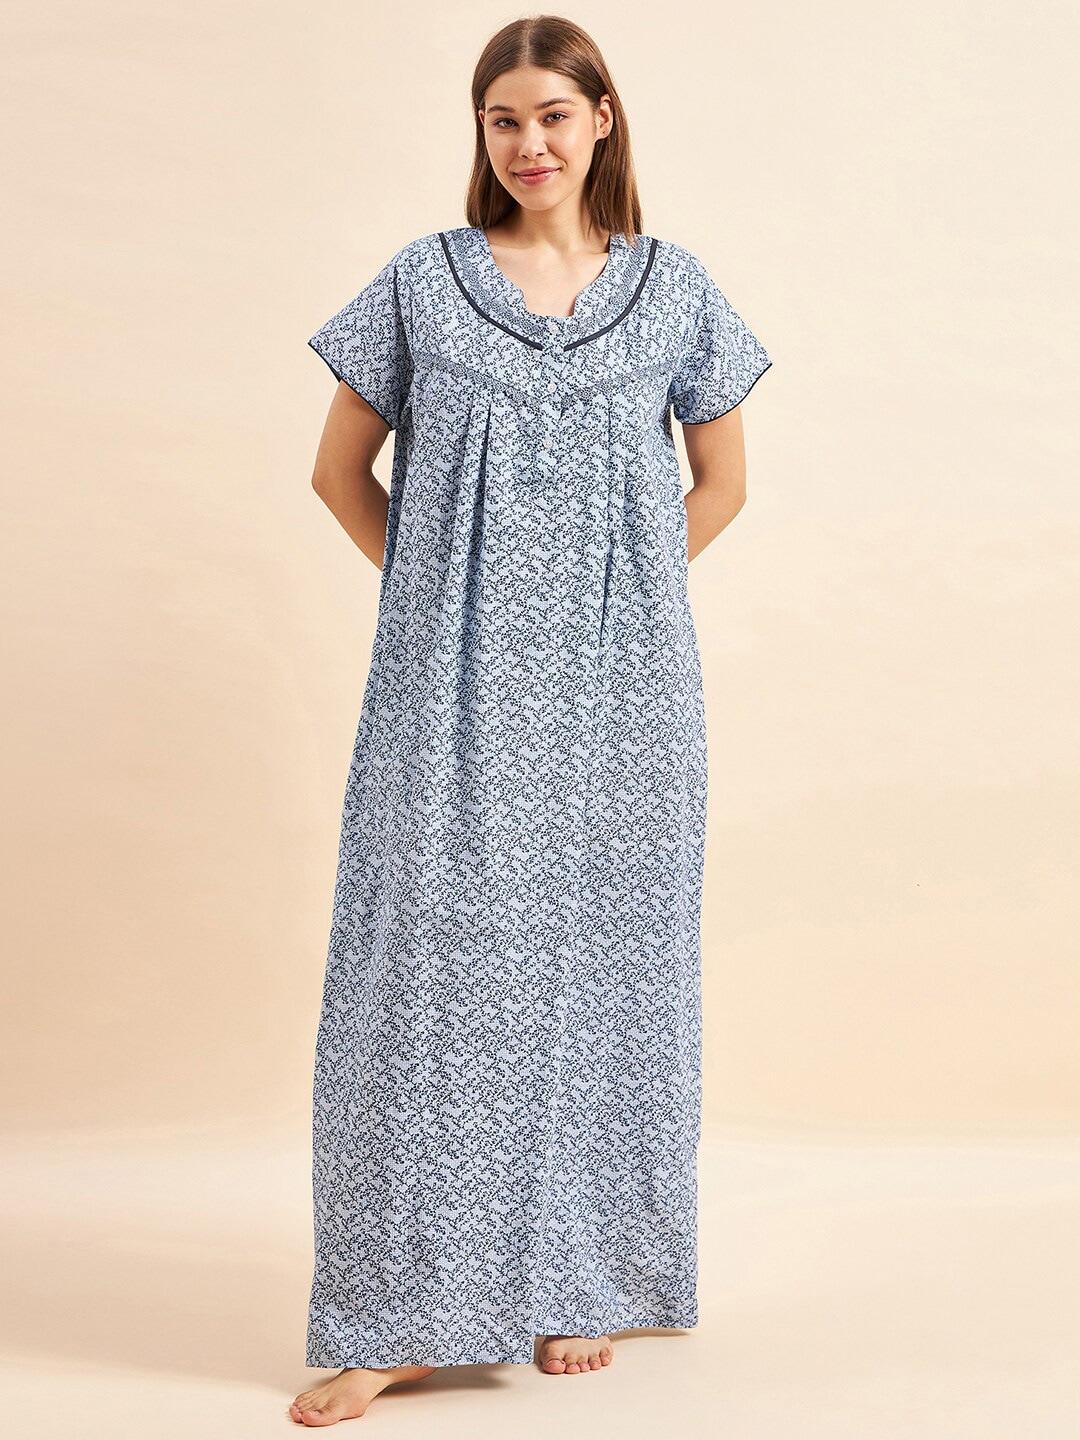 sweet-dreams-navy-blue-floral-printed-pure-cotton-maxi-nightdress